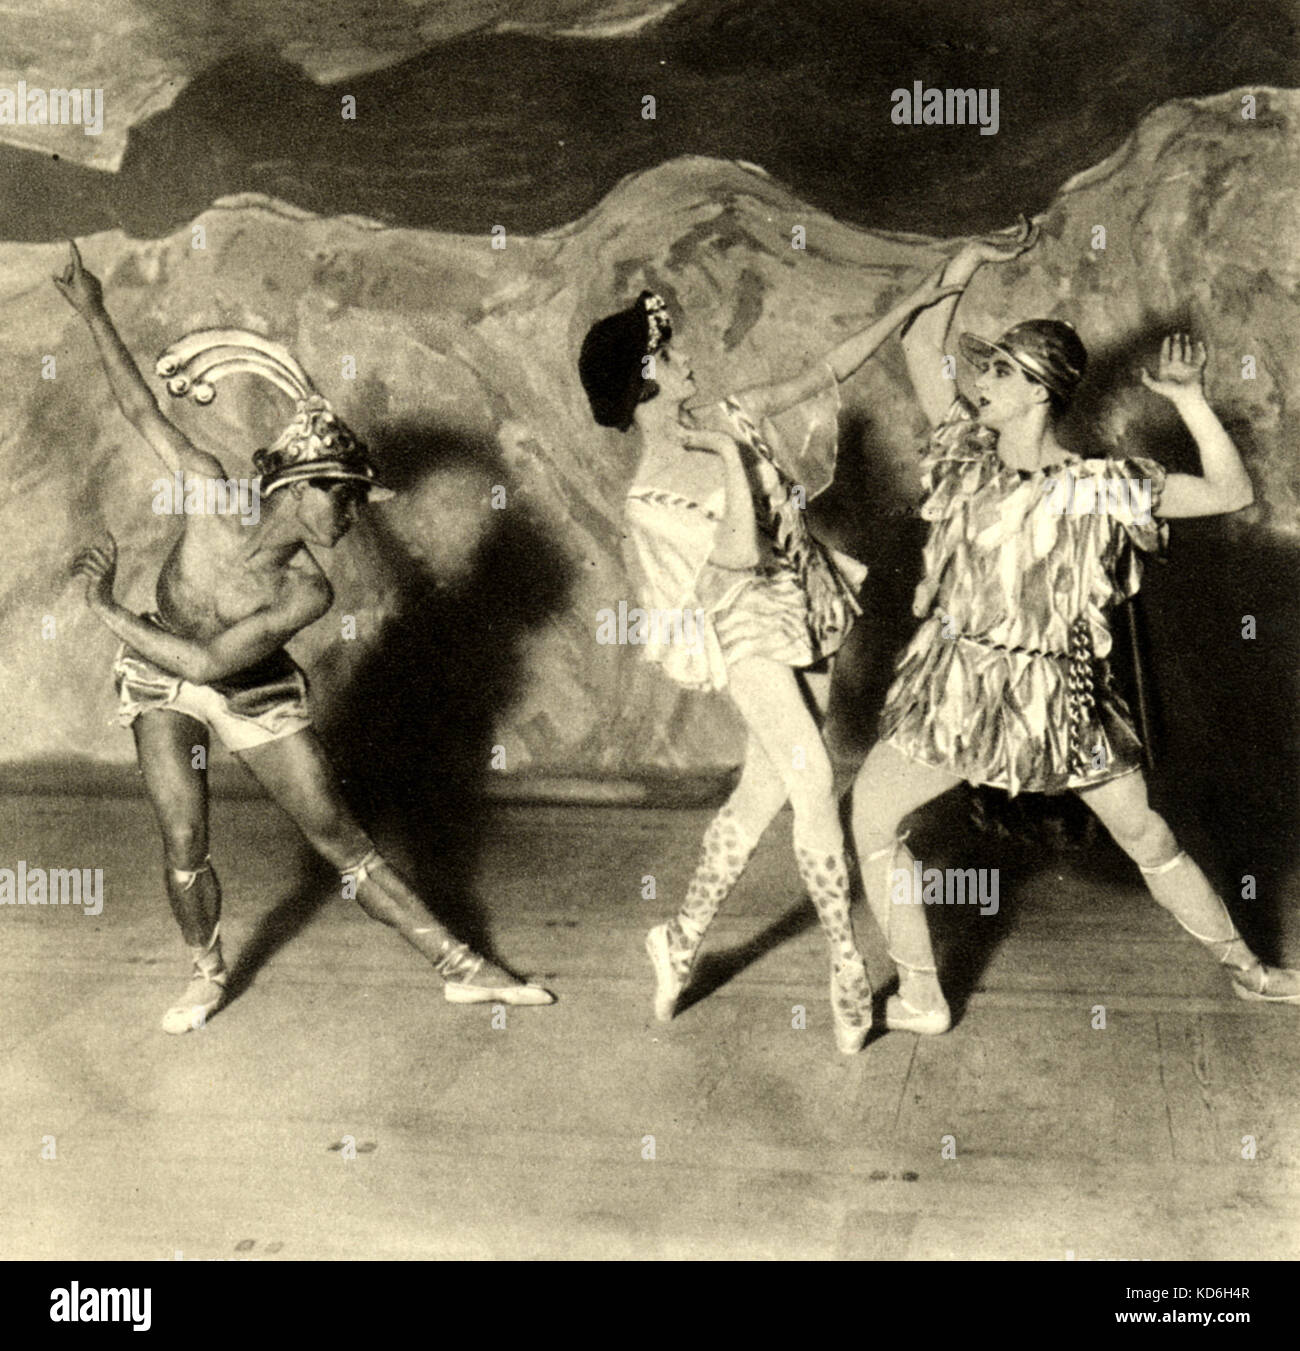 Vladimir Dukelsky's ballet 'Zephyr and Flora'. Scene with Serge Lifar, Alice Nikitina, Anton Dolin. Premiered by Ballets Russes 28 April 1925, Monte Carlo. Choreography by Massine, scenery & costumes by G. Bracque.  Masks & symbols by O. Messel. Russian-American composer 1903-1969. Stock Photo